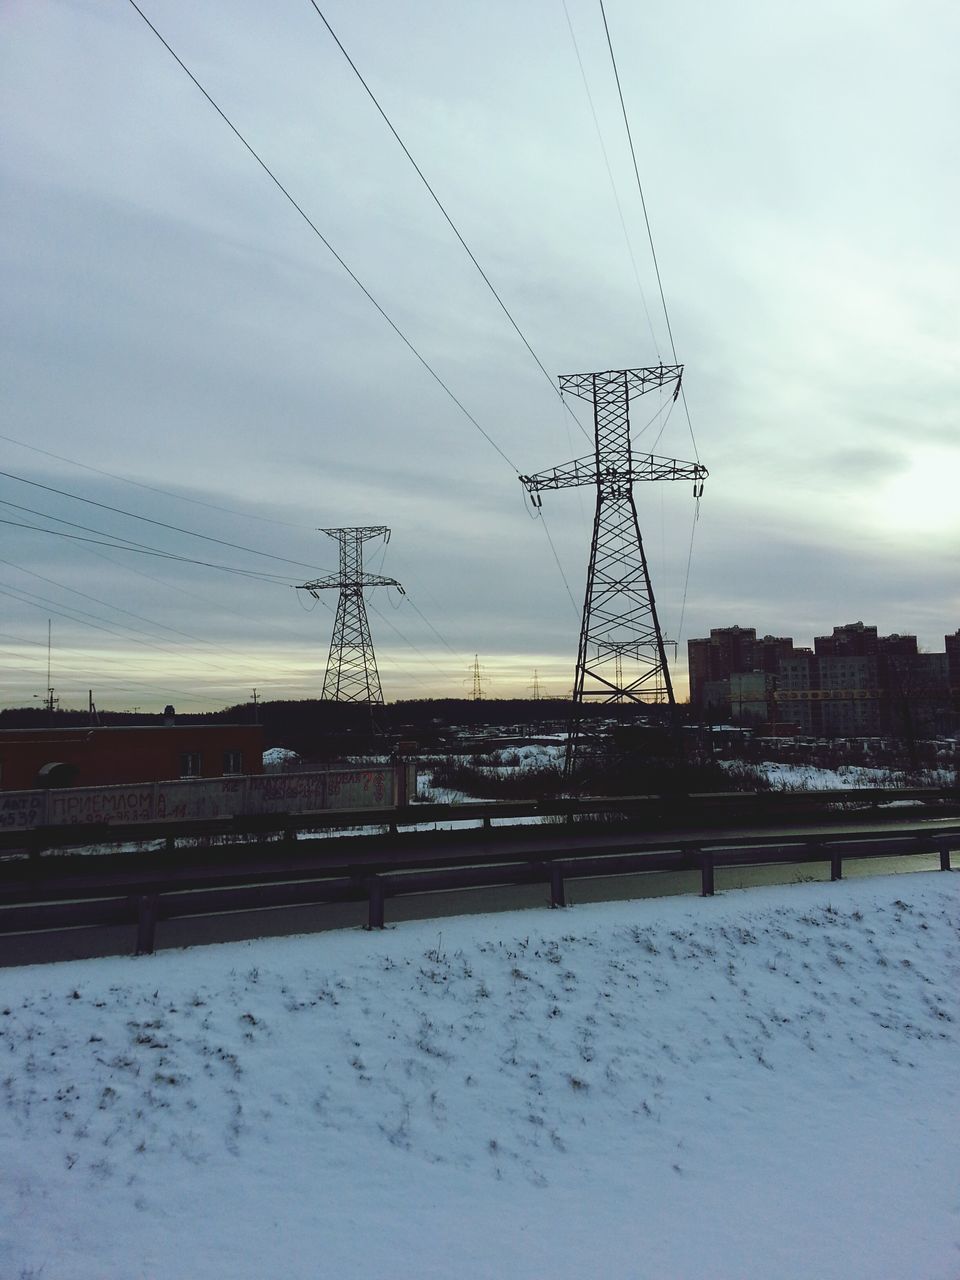 sky, power line, electricity pylon, connection, built structure, cloud - sky, cable, architecture, electricity, building exterior, snow, transportation, power supply, cloudy, winter, cloud, weather, cold temperature, outdoors, fuel and power generation